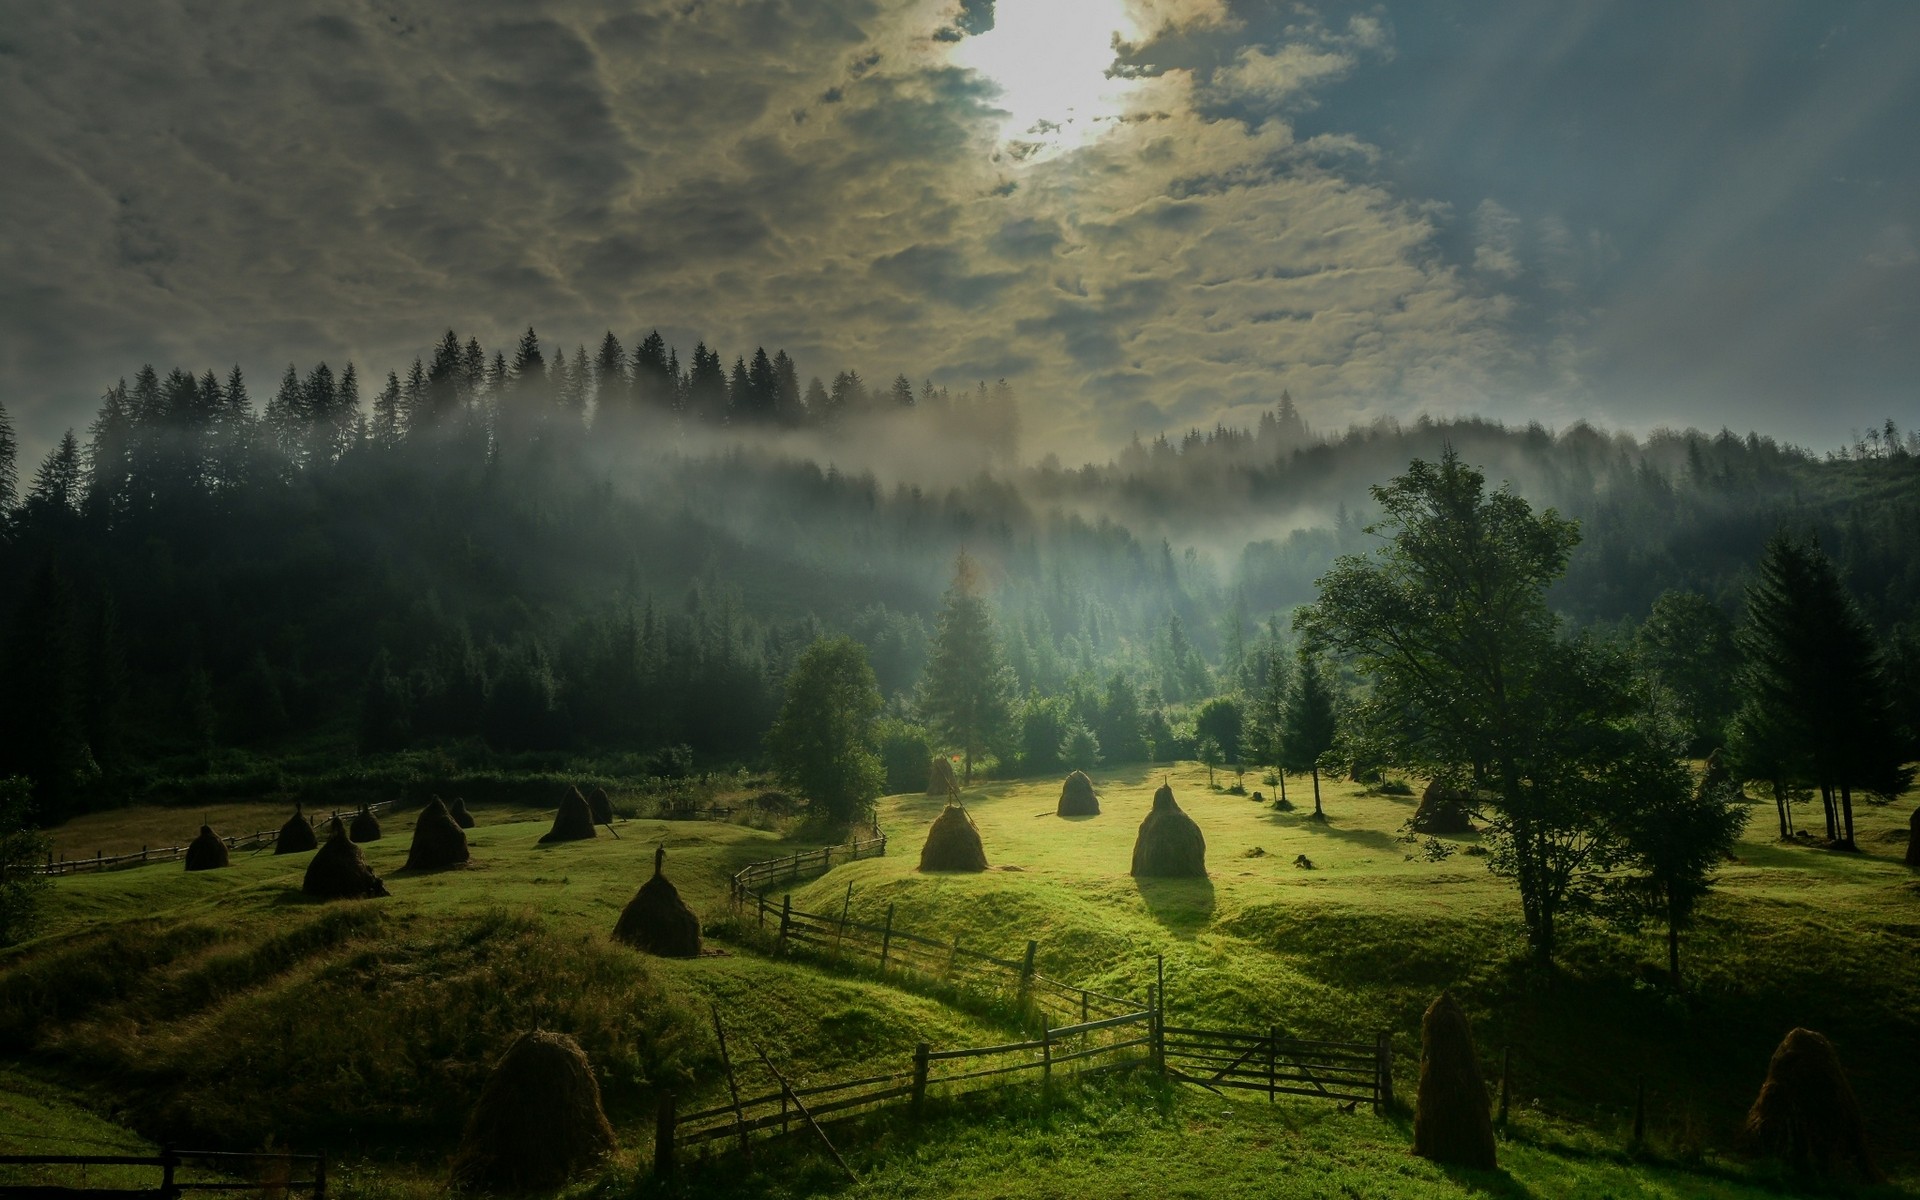 Landscape Nature Morning Sunlight Sky Mist Field Forest Hills Fence Trees Green Clouds Hay 1920x1200